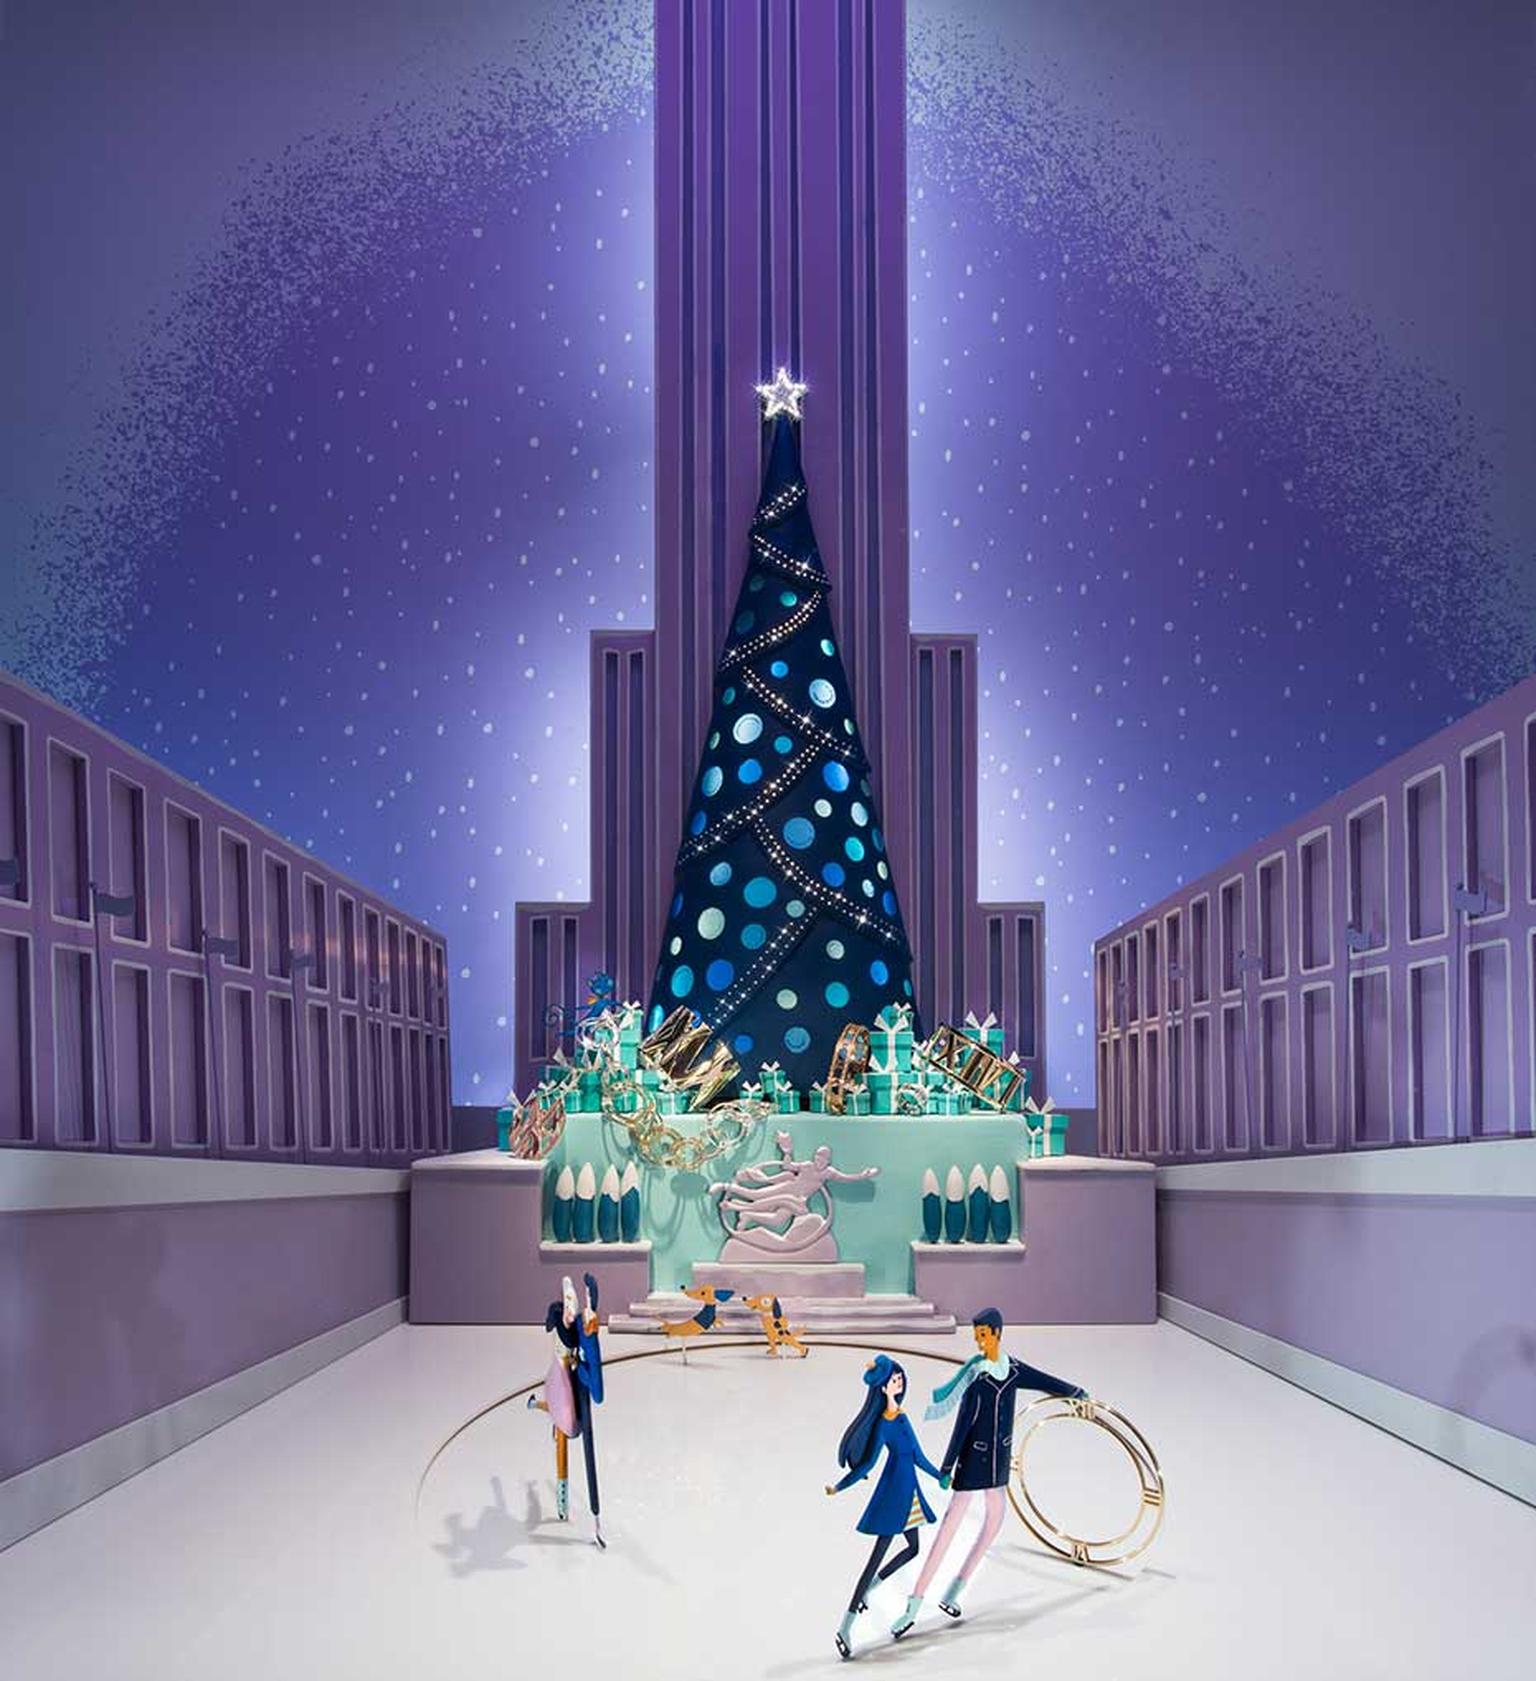 Tiffany is famous for its Christmas windows, and this year the Tiffany boutique on Bond Street has taken inspiration from New York with displays depicting stylishly festive scenes in the Big Apple, including ice skating in front of the Rockefeller Center.